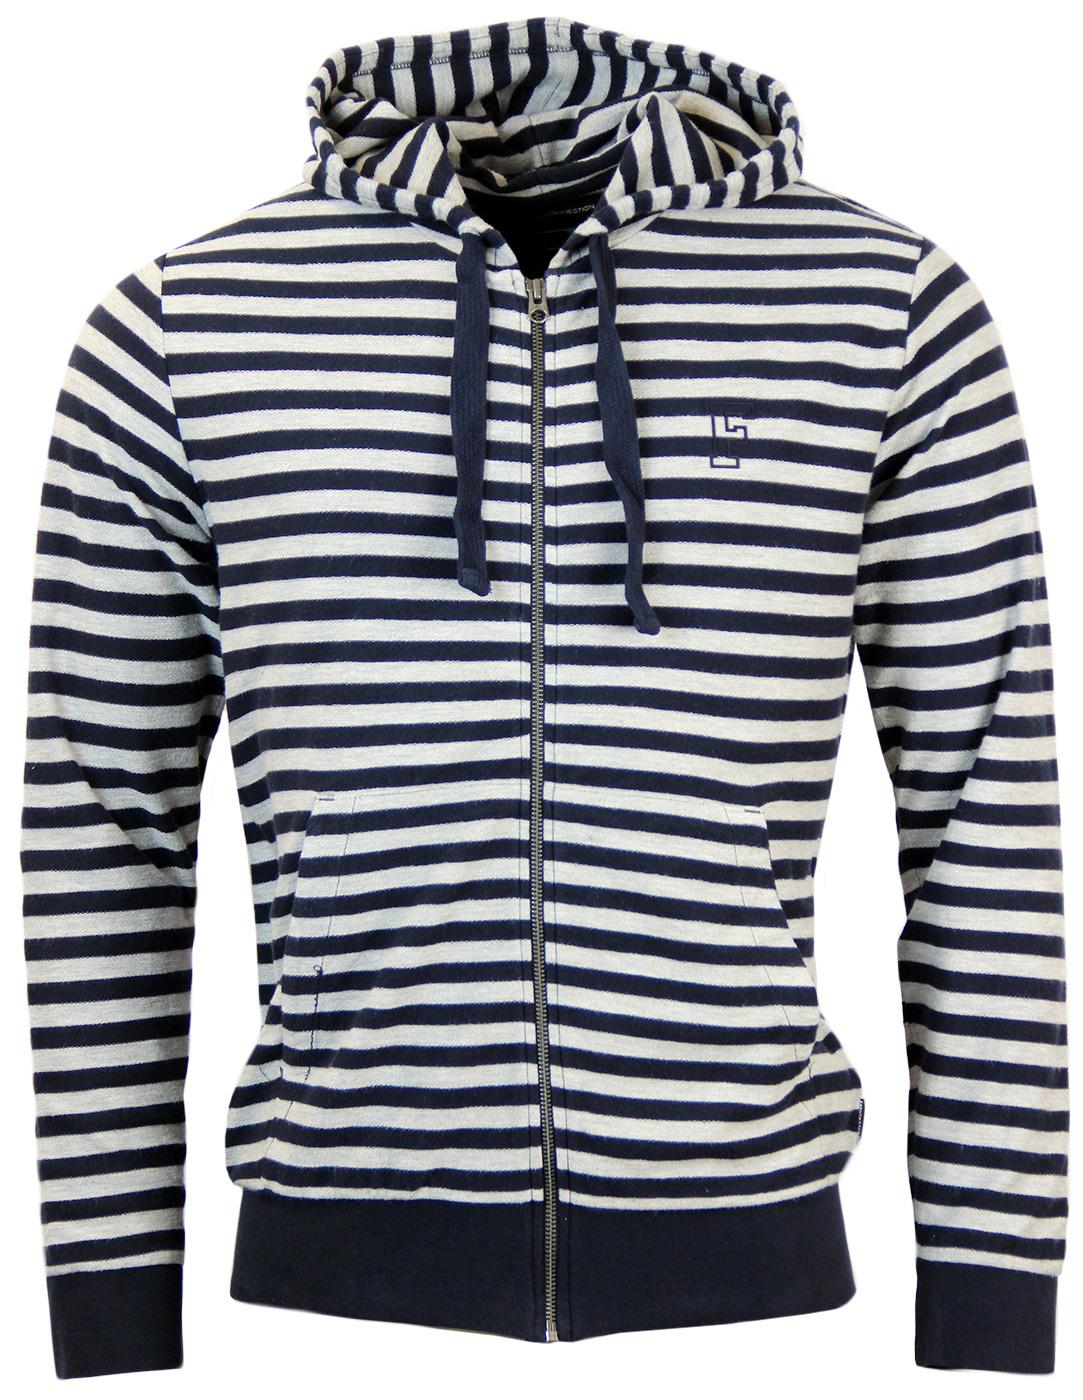 FRENCH CONNECTION Retro Indie Striped Hoodie